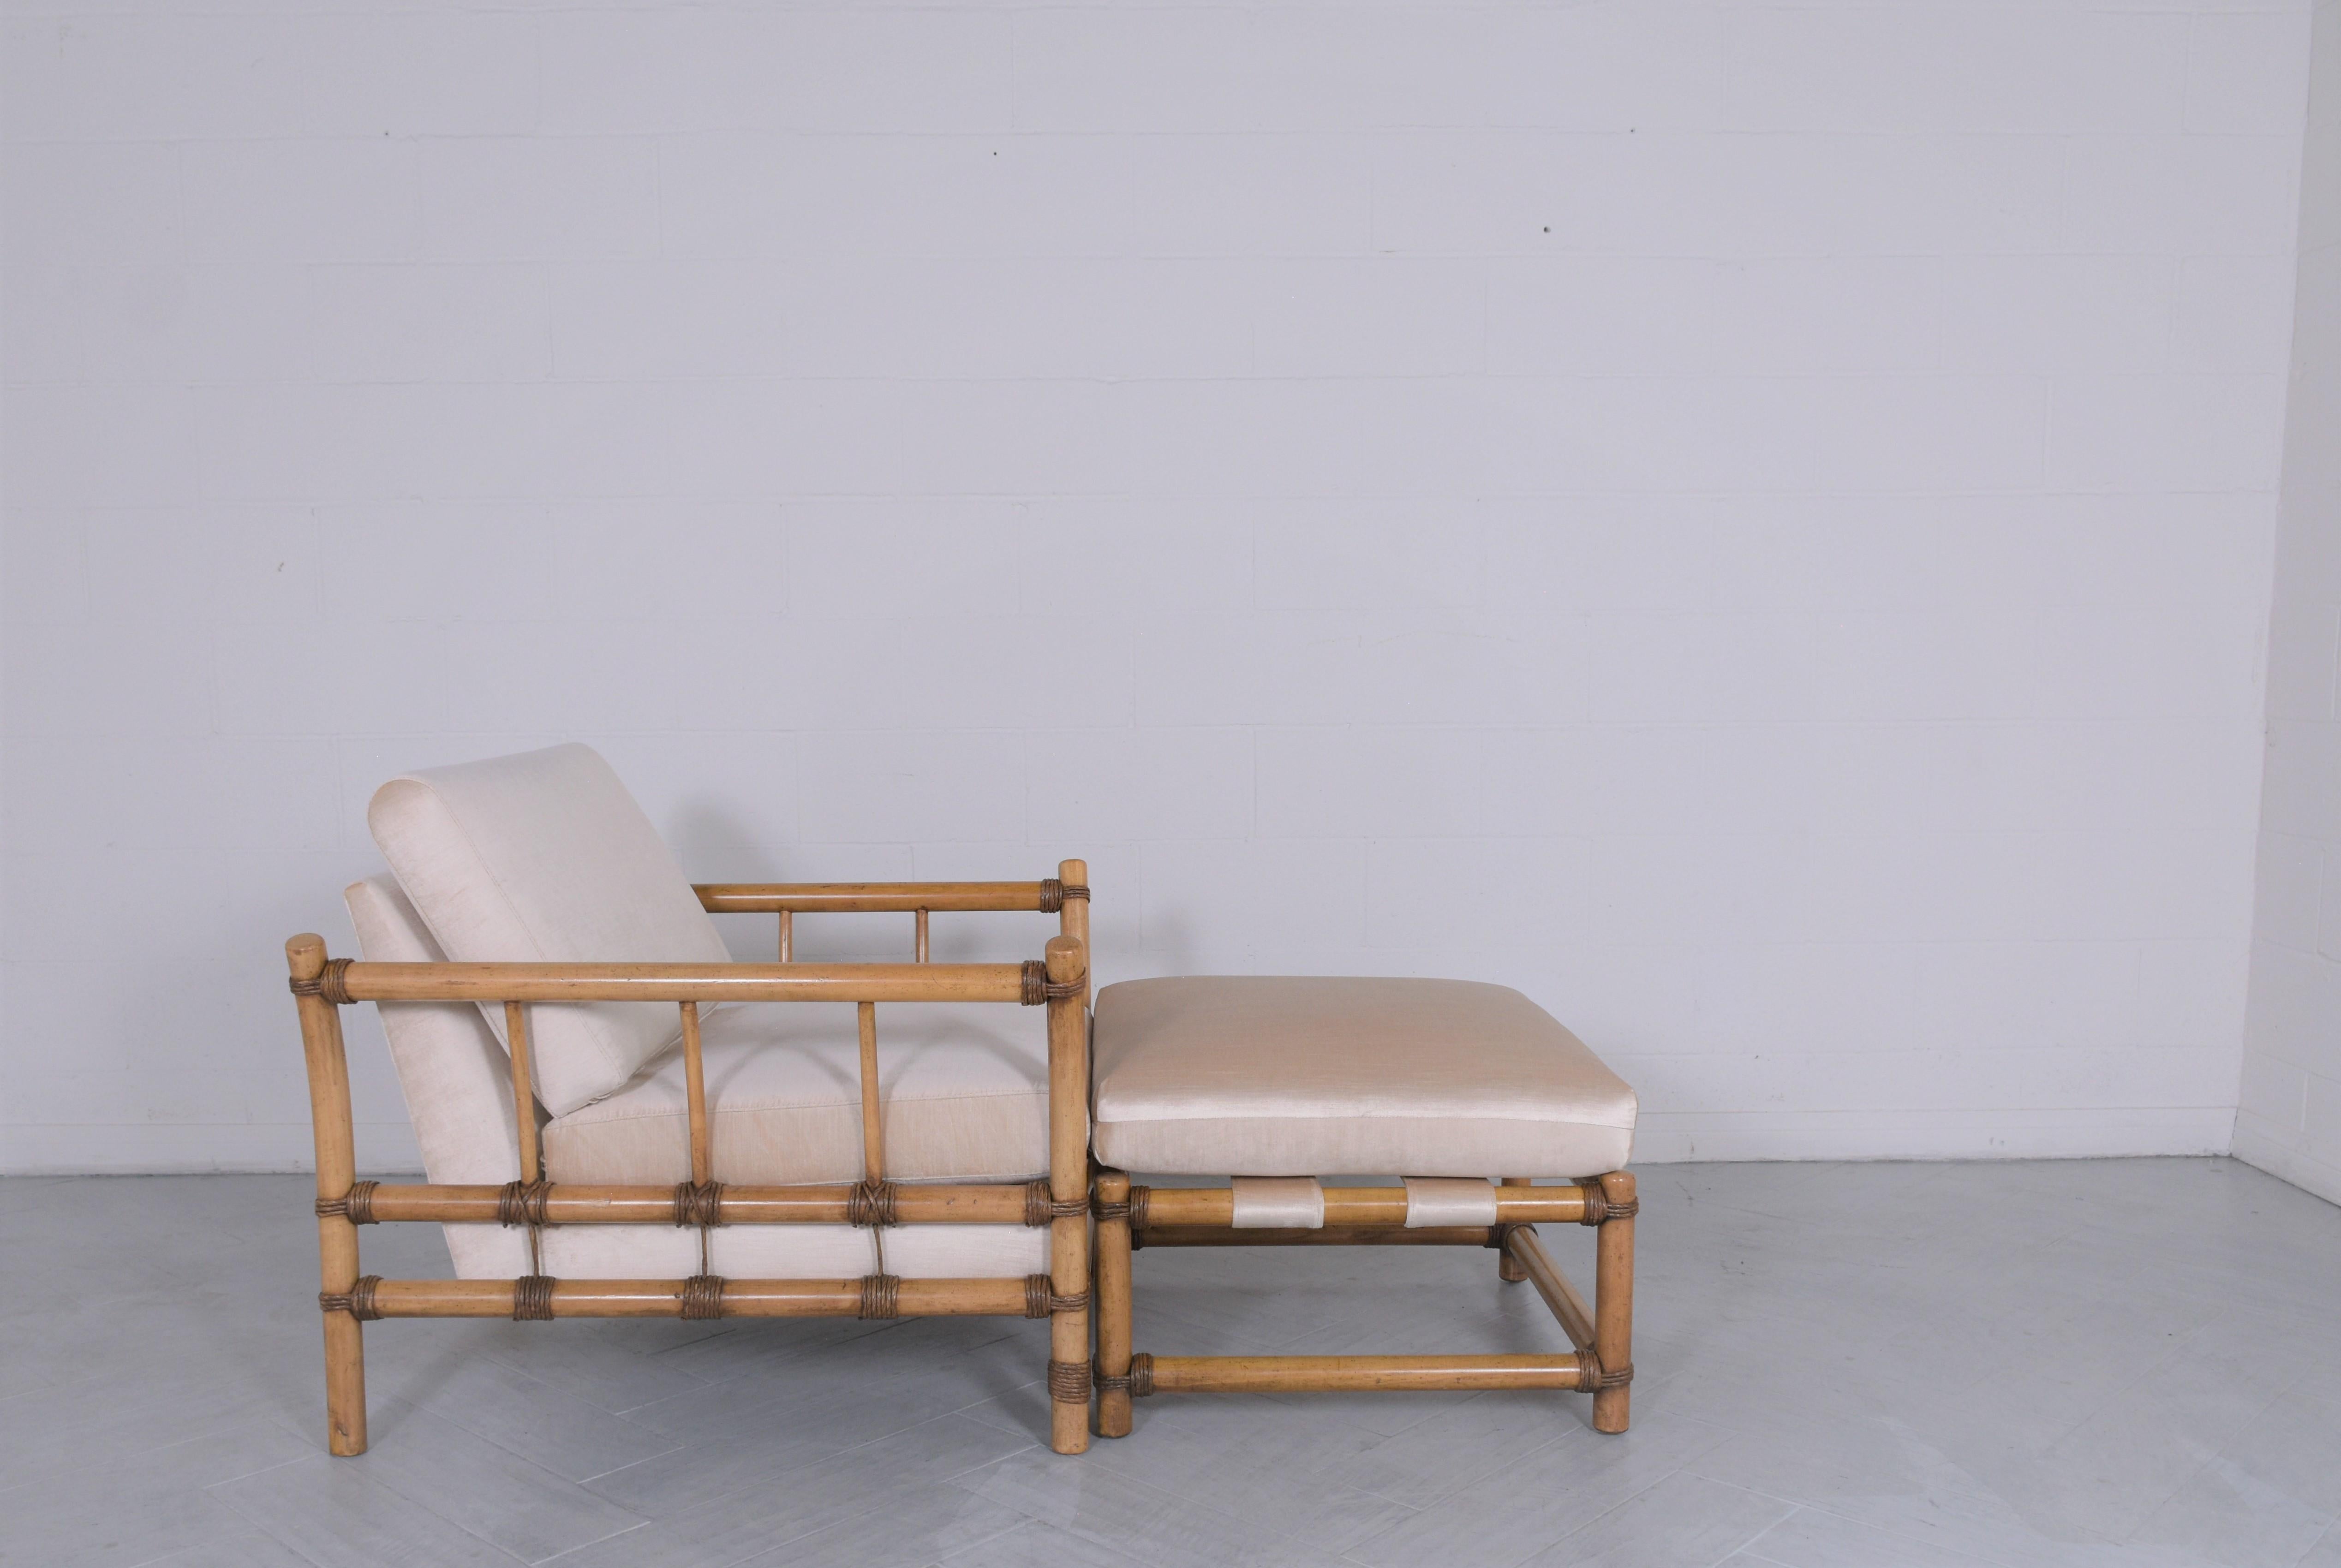 Lacquer Restored Vintage Bamboo Style Chaise Lounge with Rattan Accents & Velvet Cushion For Sale